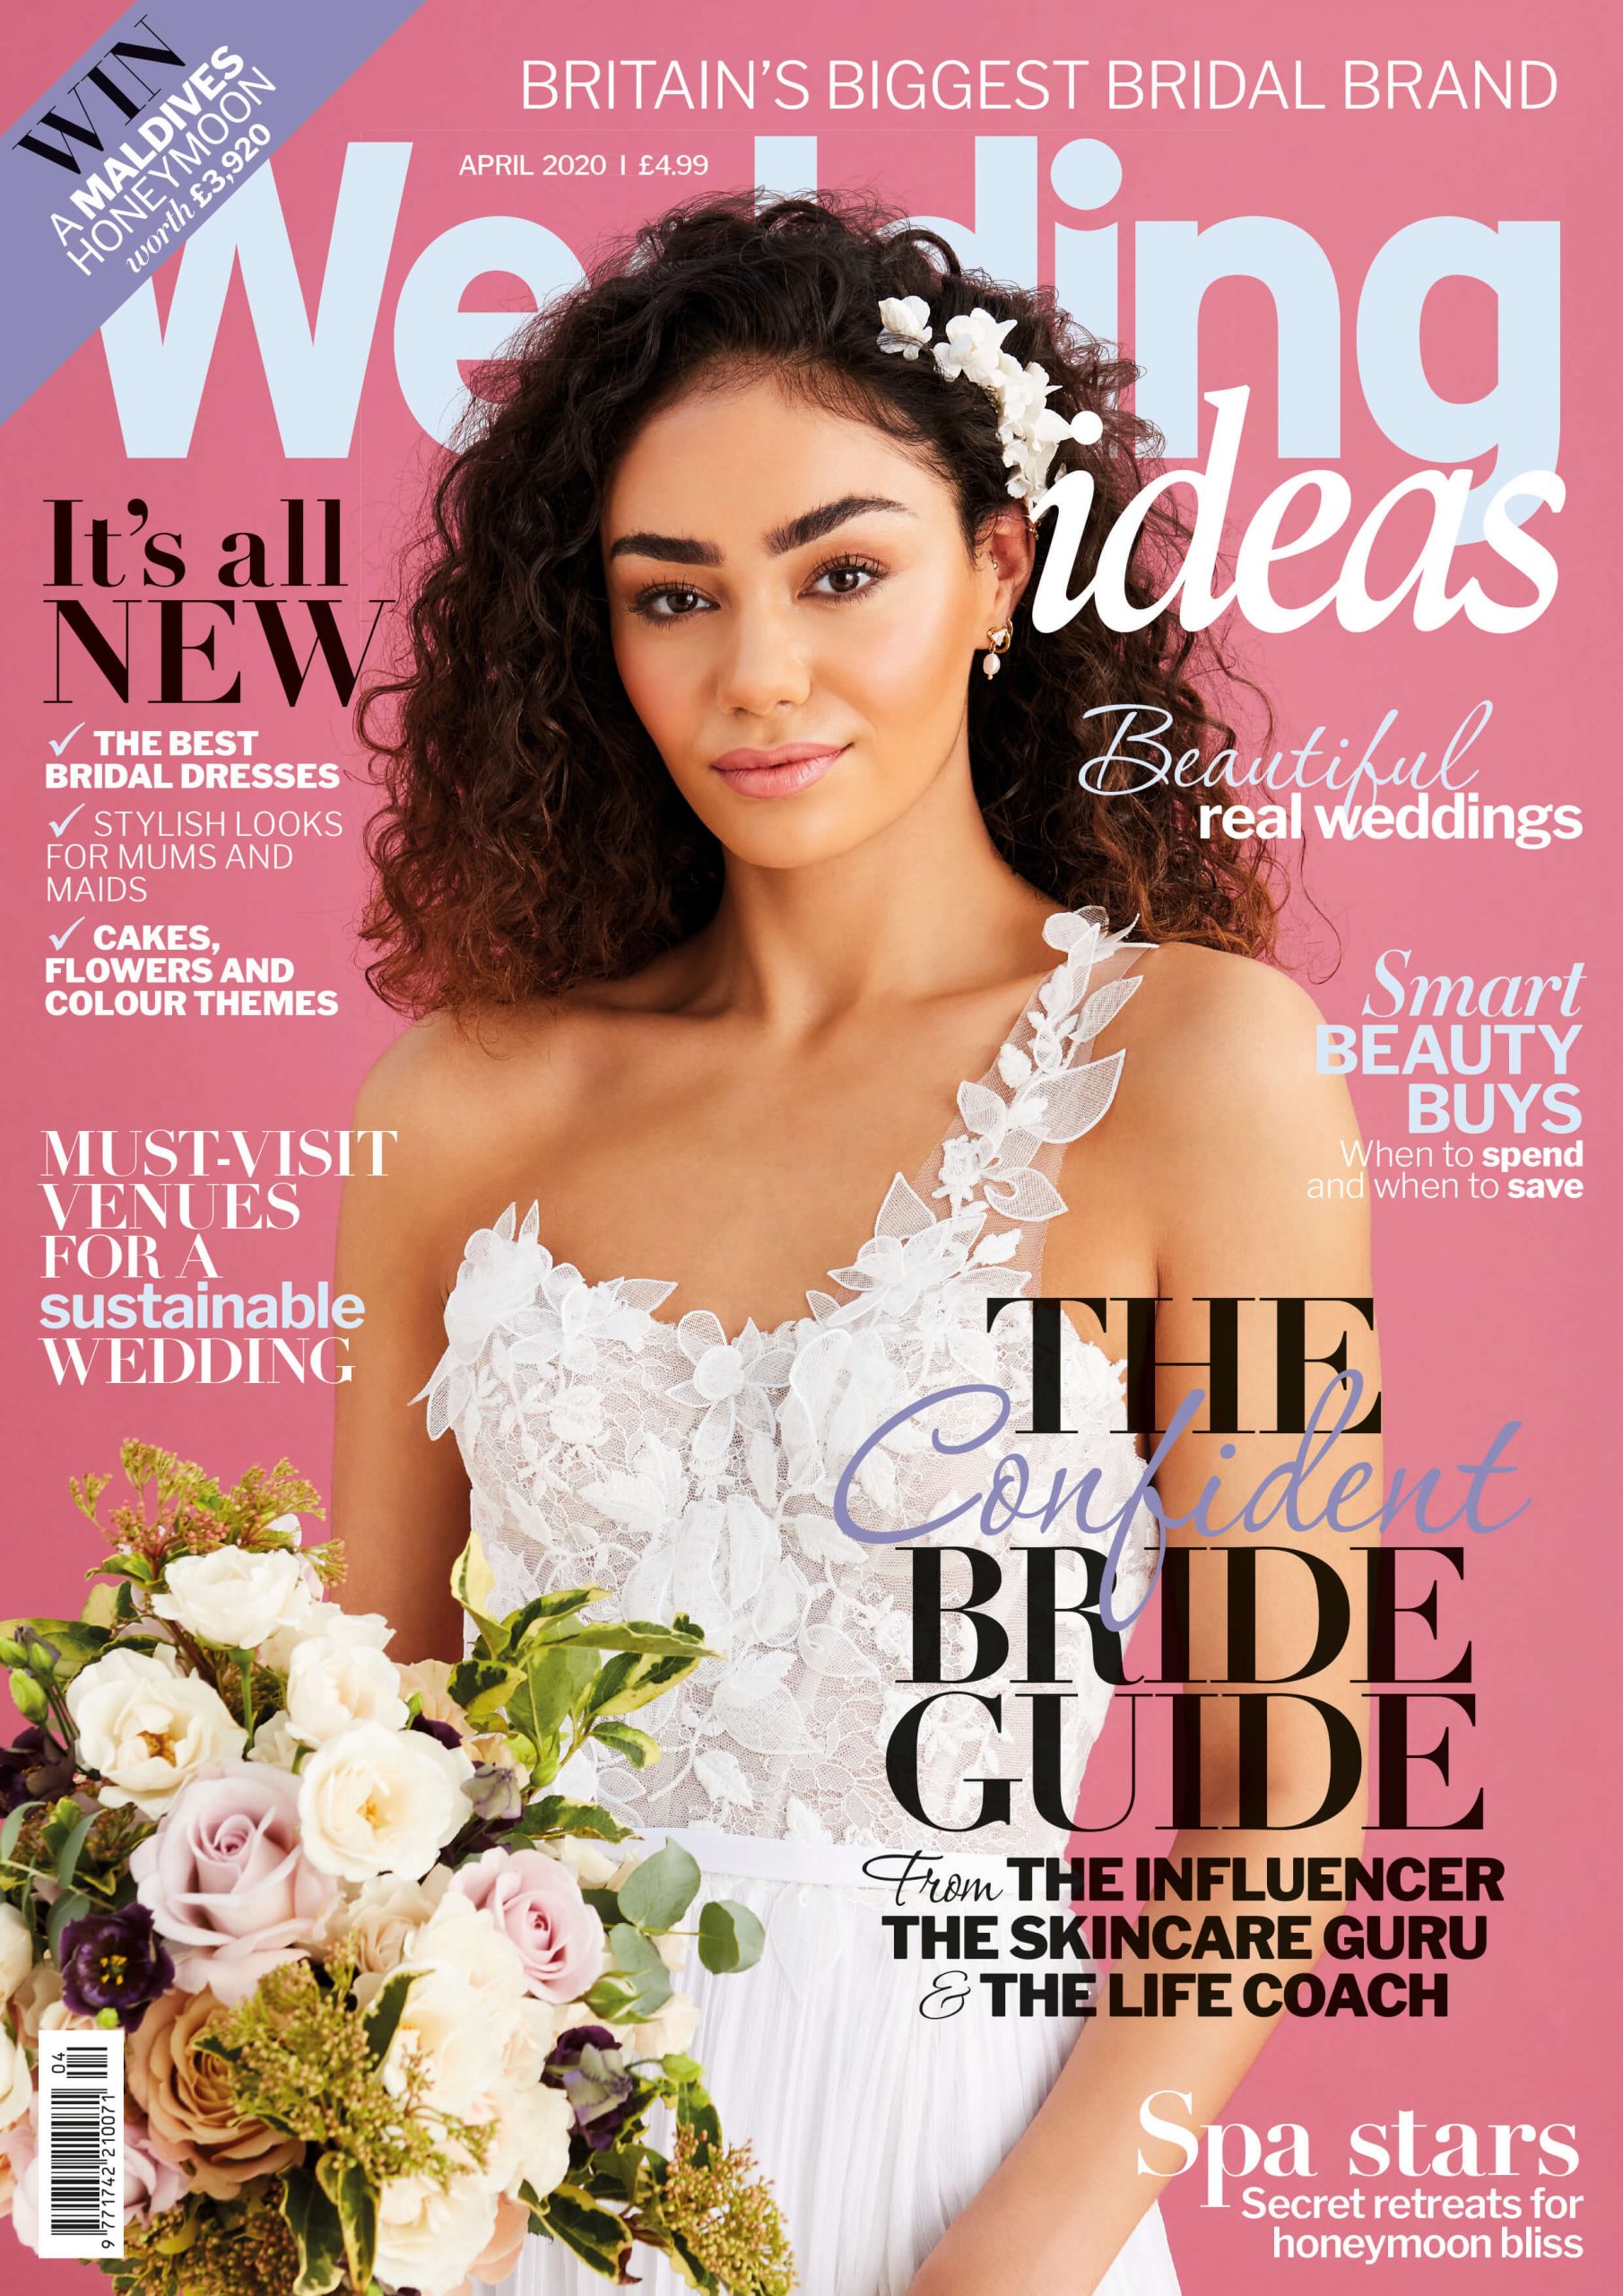 The April cover of Wedding Ideas styled by Pierre Carr and features model Maya Patrick